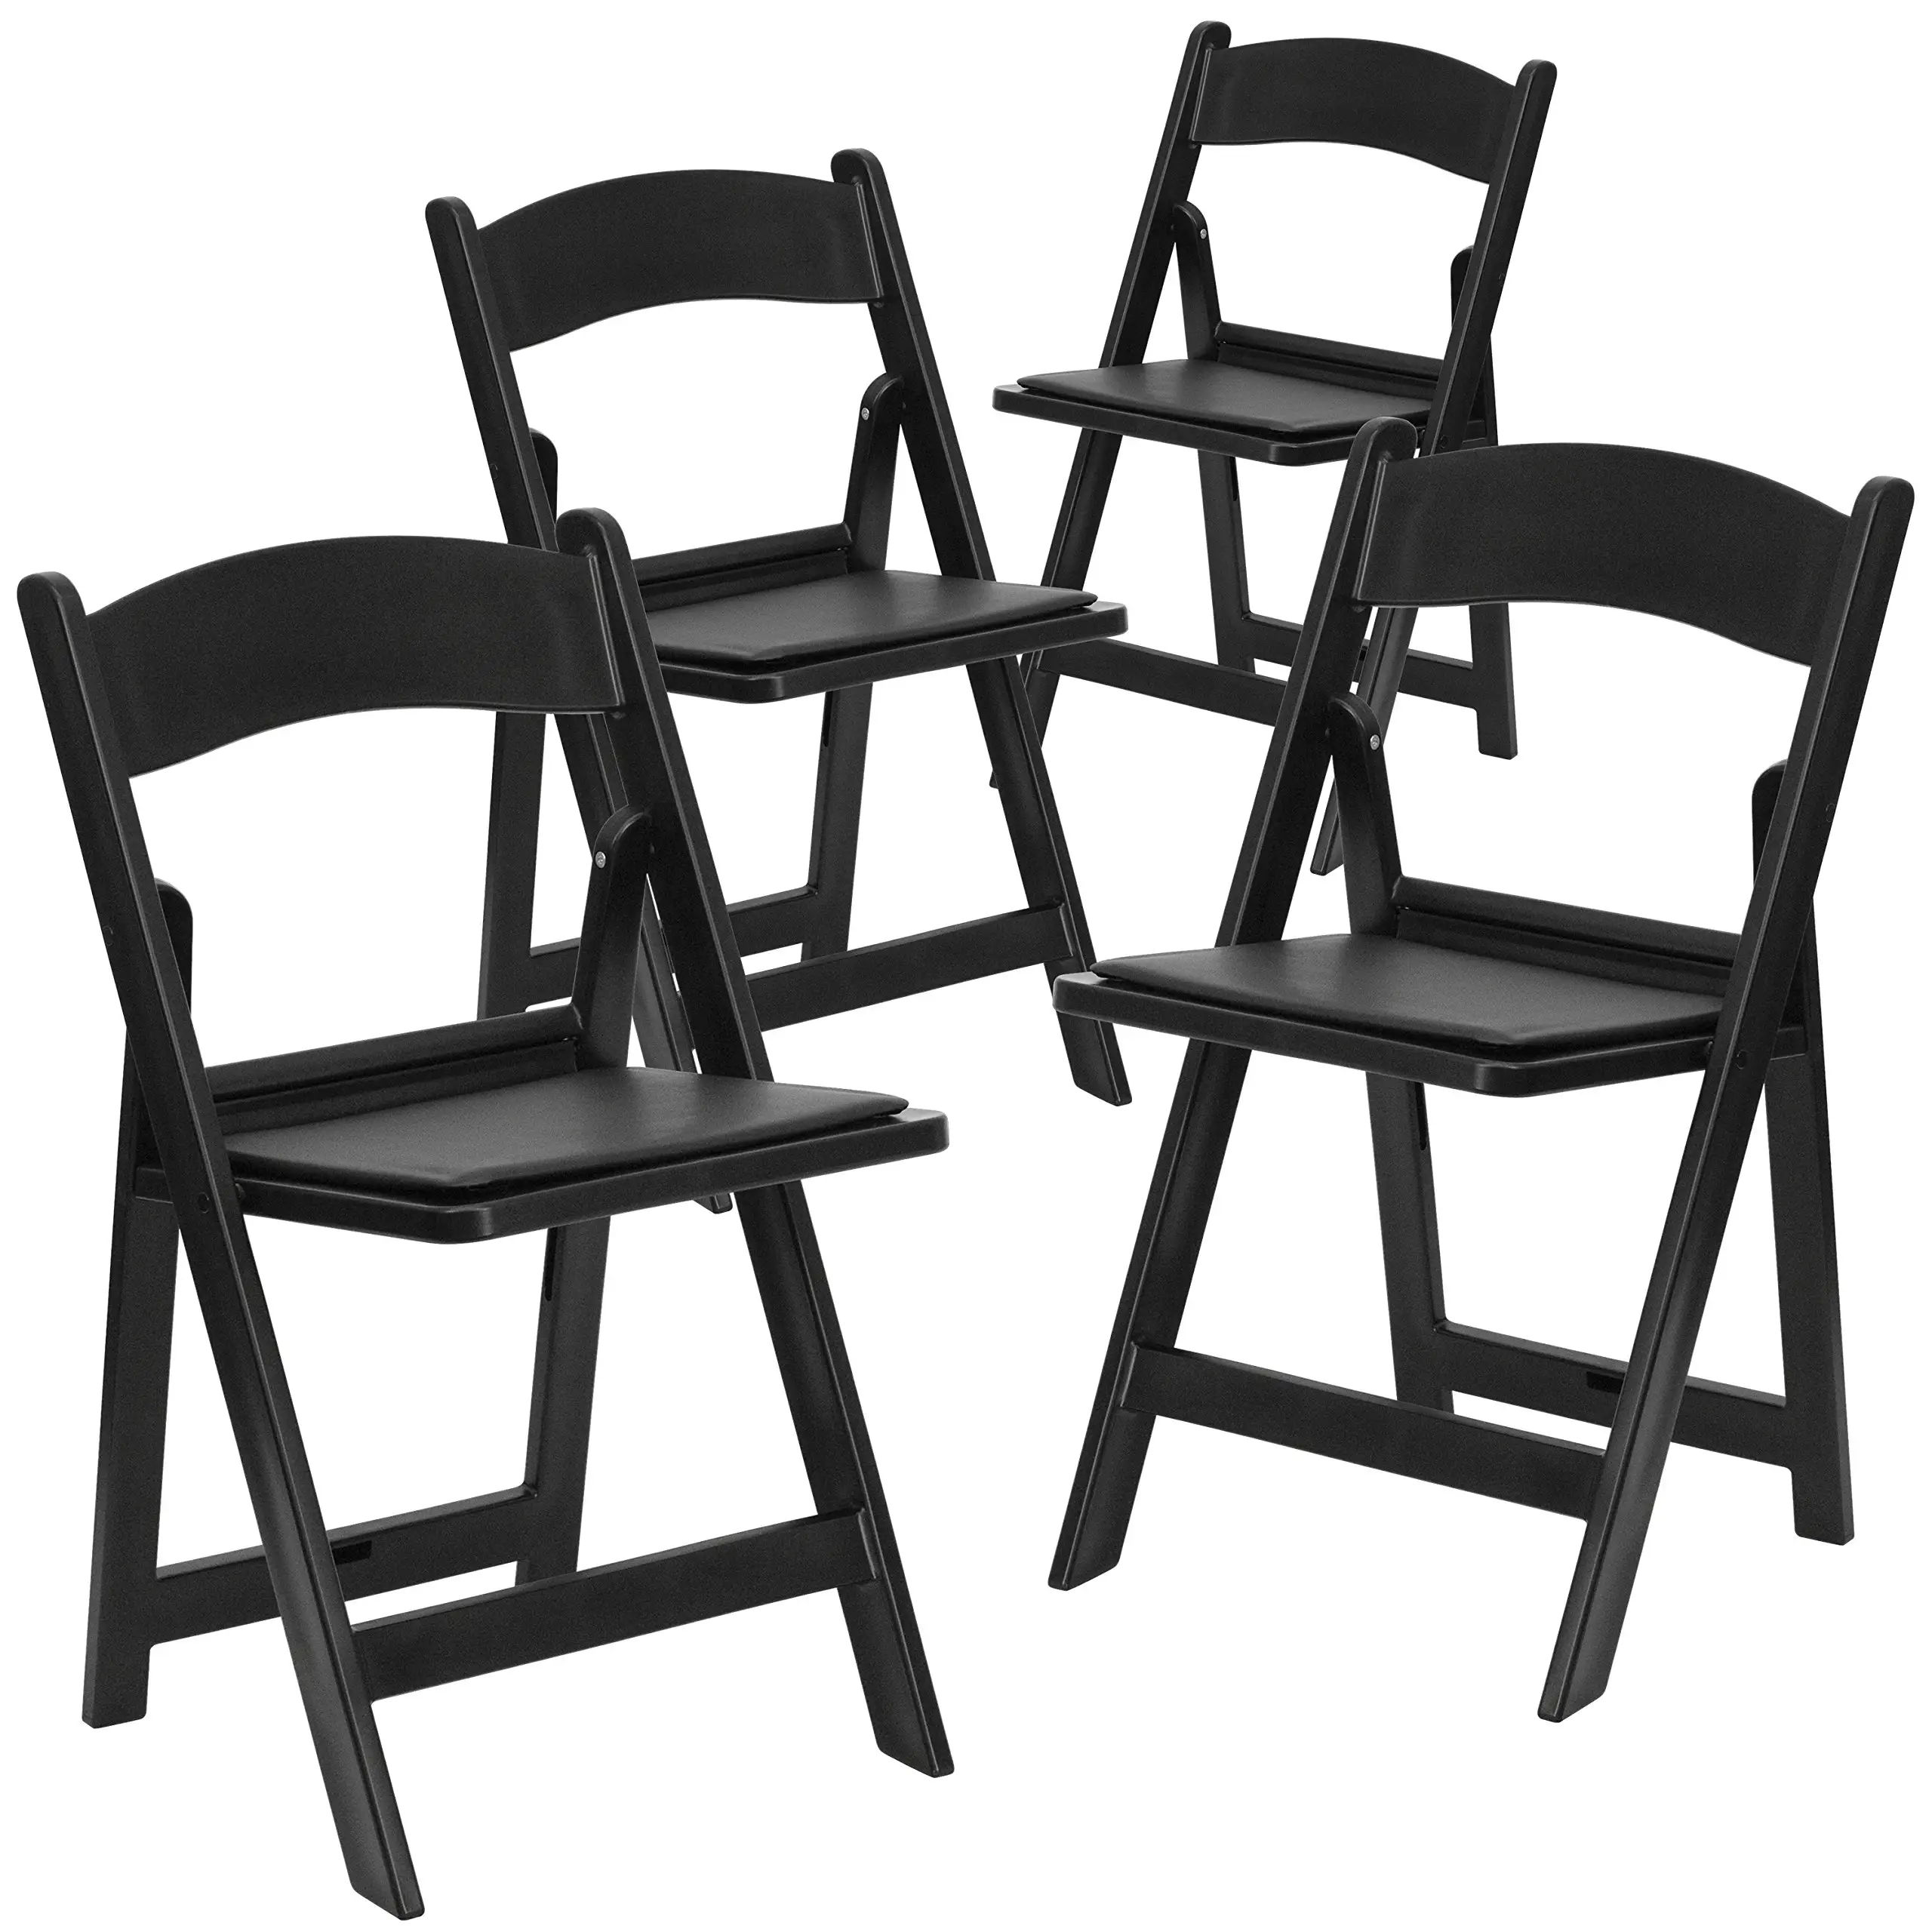 Light Comfortable Black Dining Event Resin Plastic Folding Chair with PVC Padded Seats for Wedding Party Picnic Kitchen